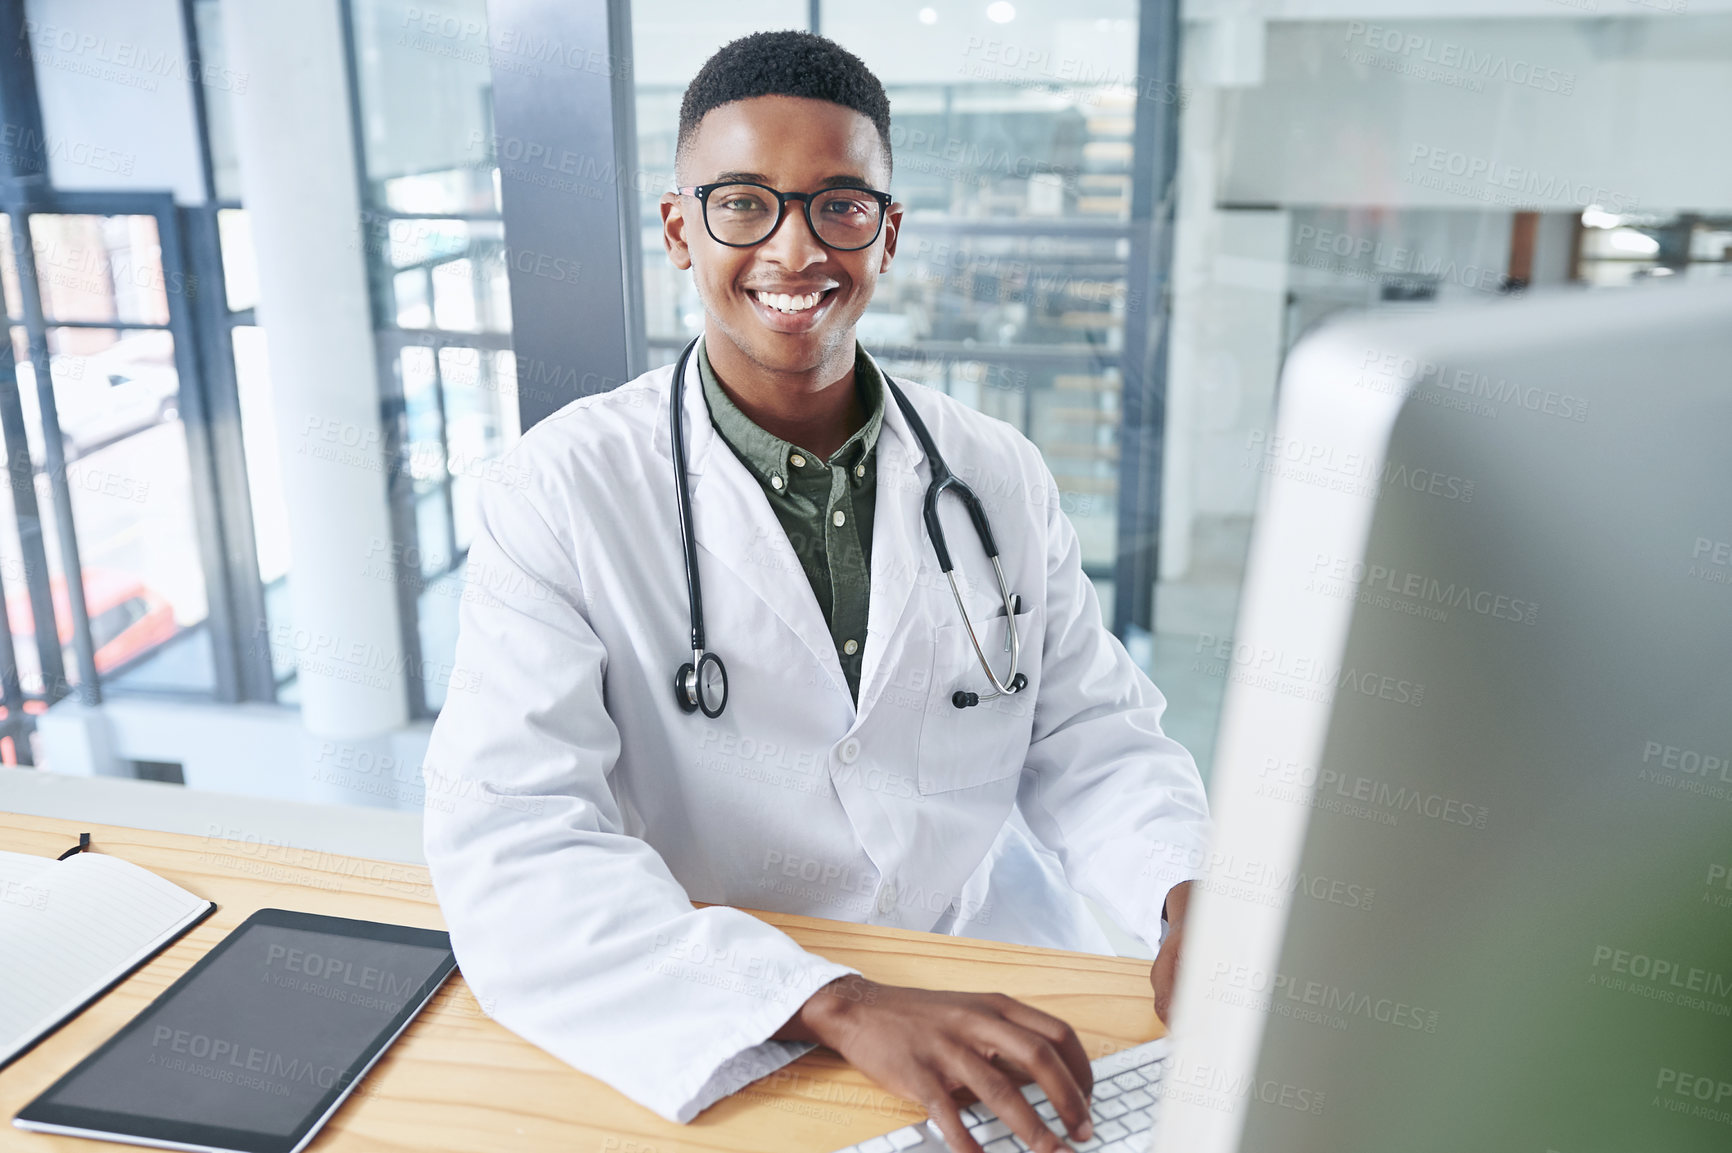 Buy stock photo Shot of a handsome young doctor sitting alone in his office at the clinic and using his computer